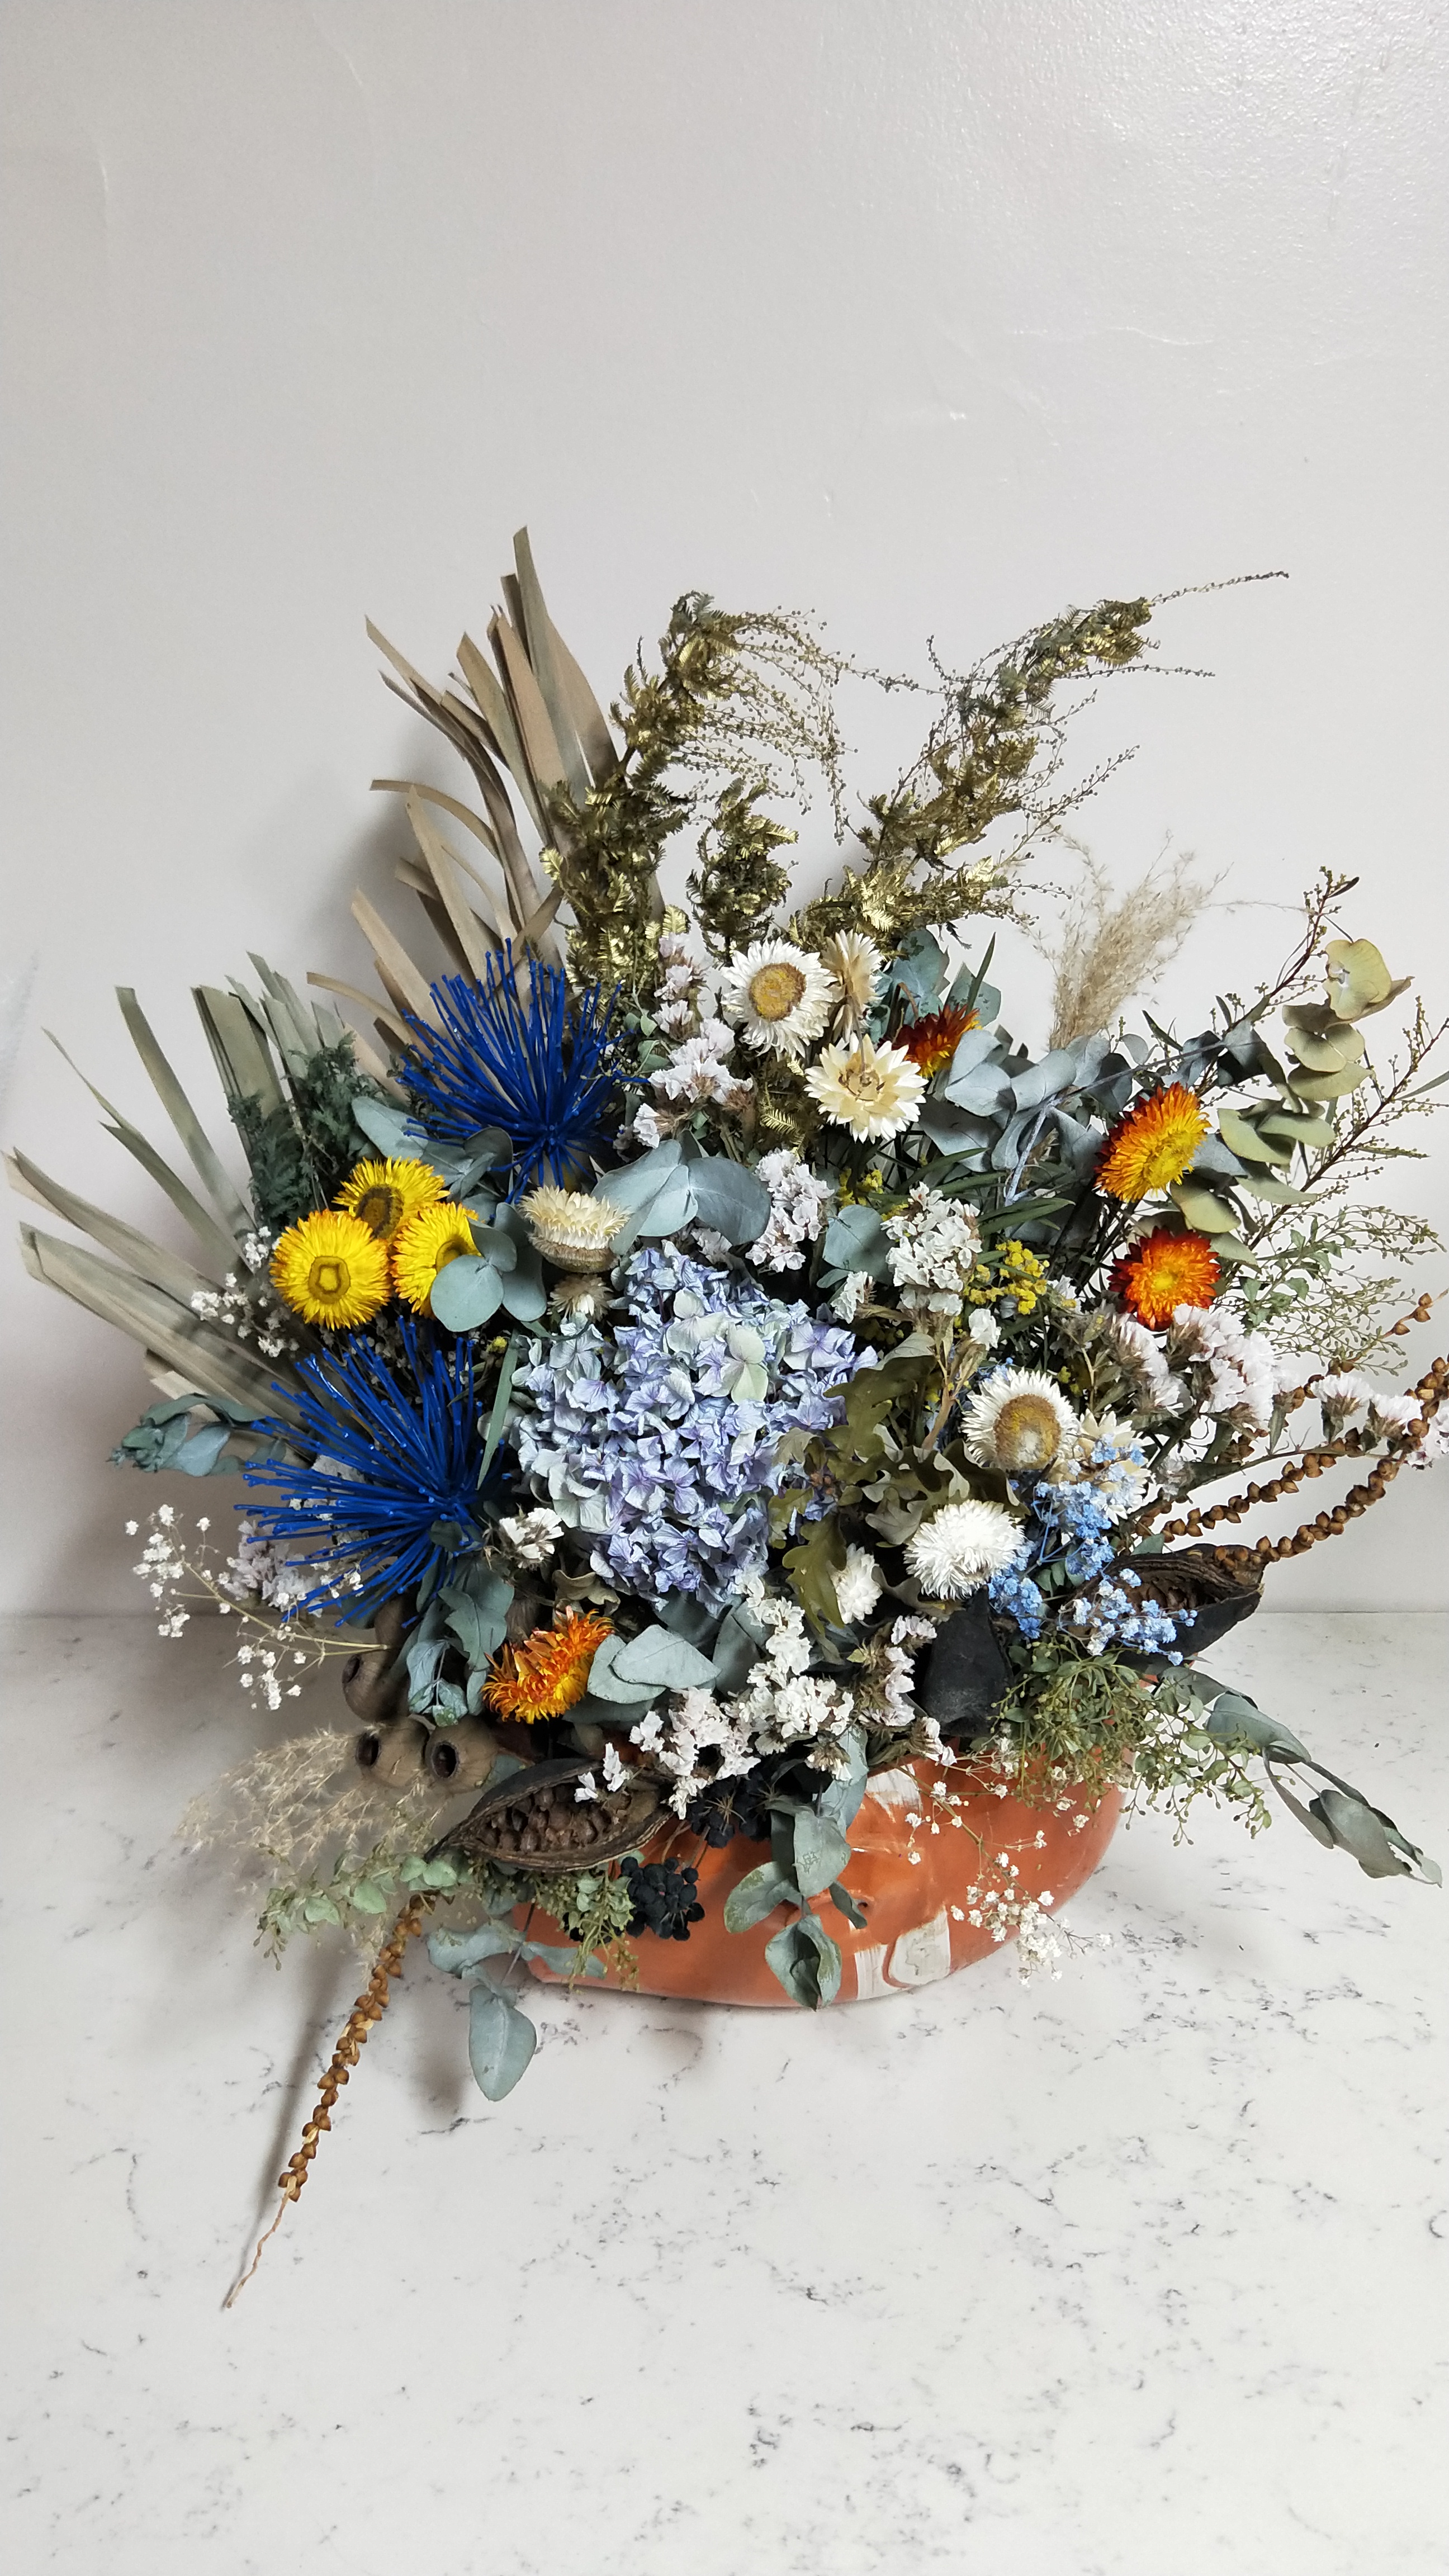 Dried arrangement, excellent choice for many occasions